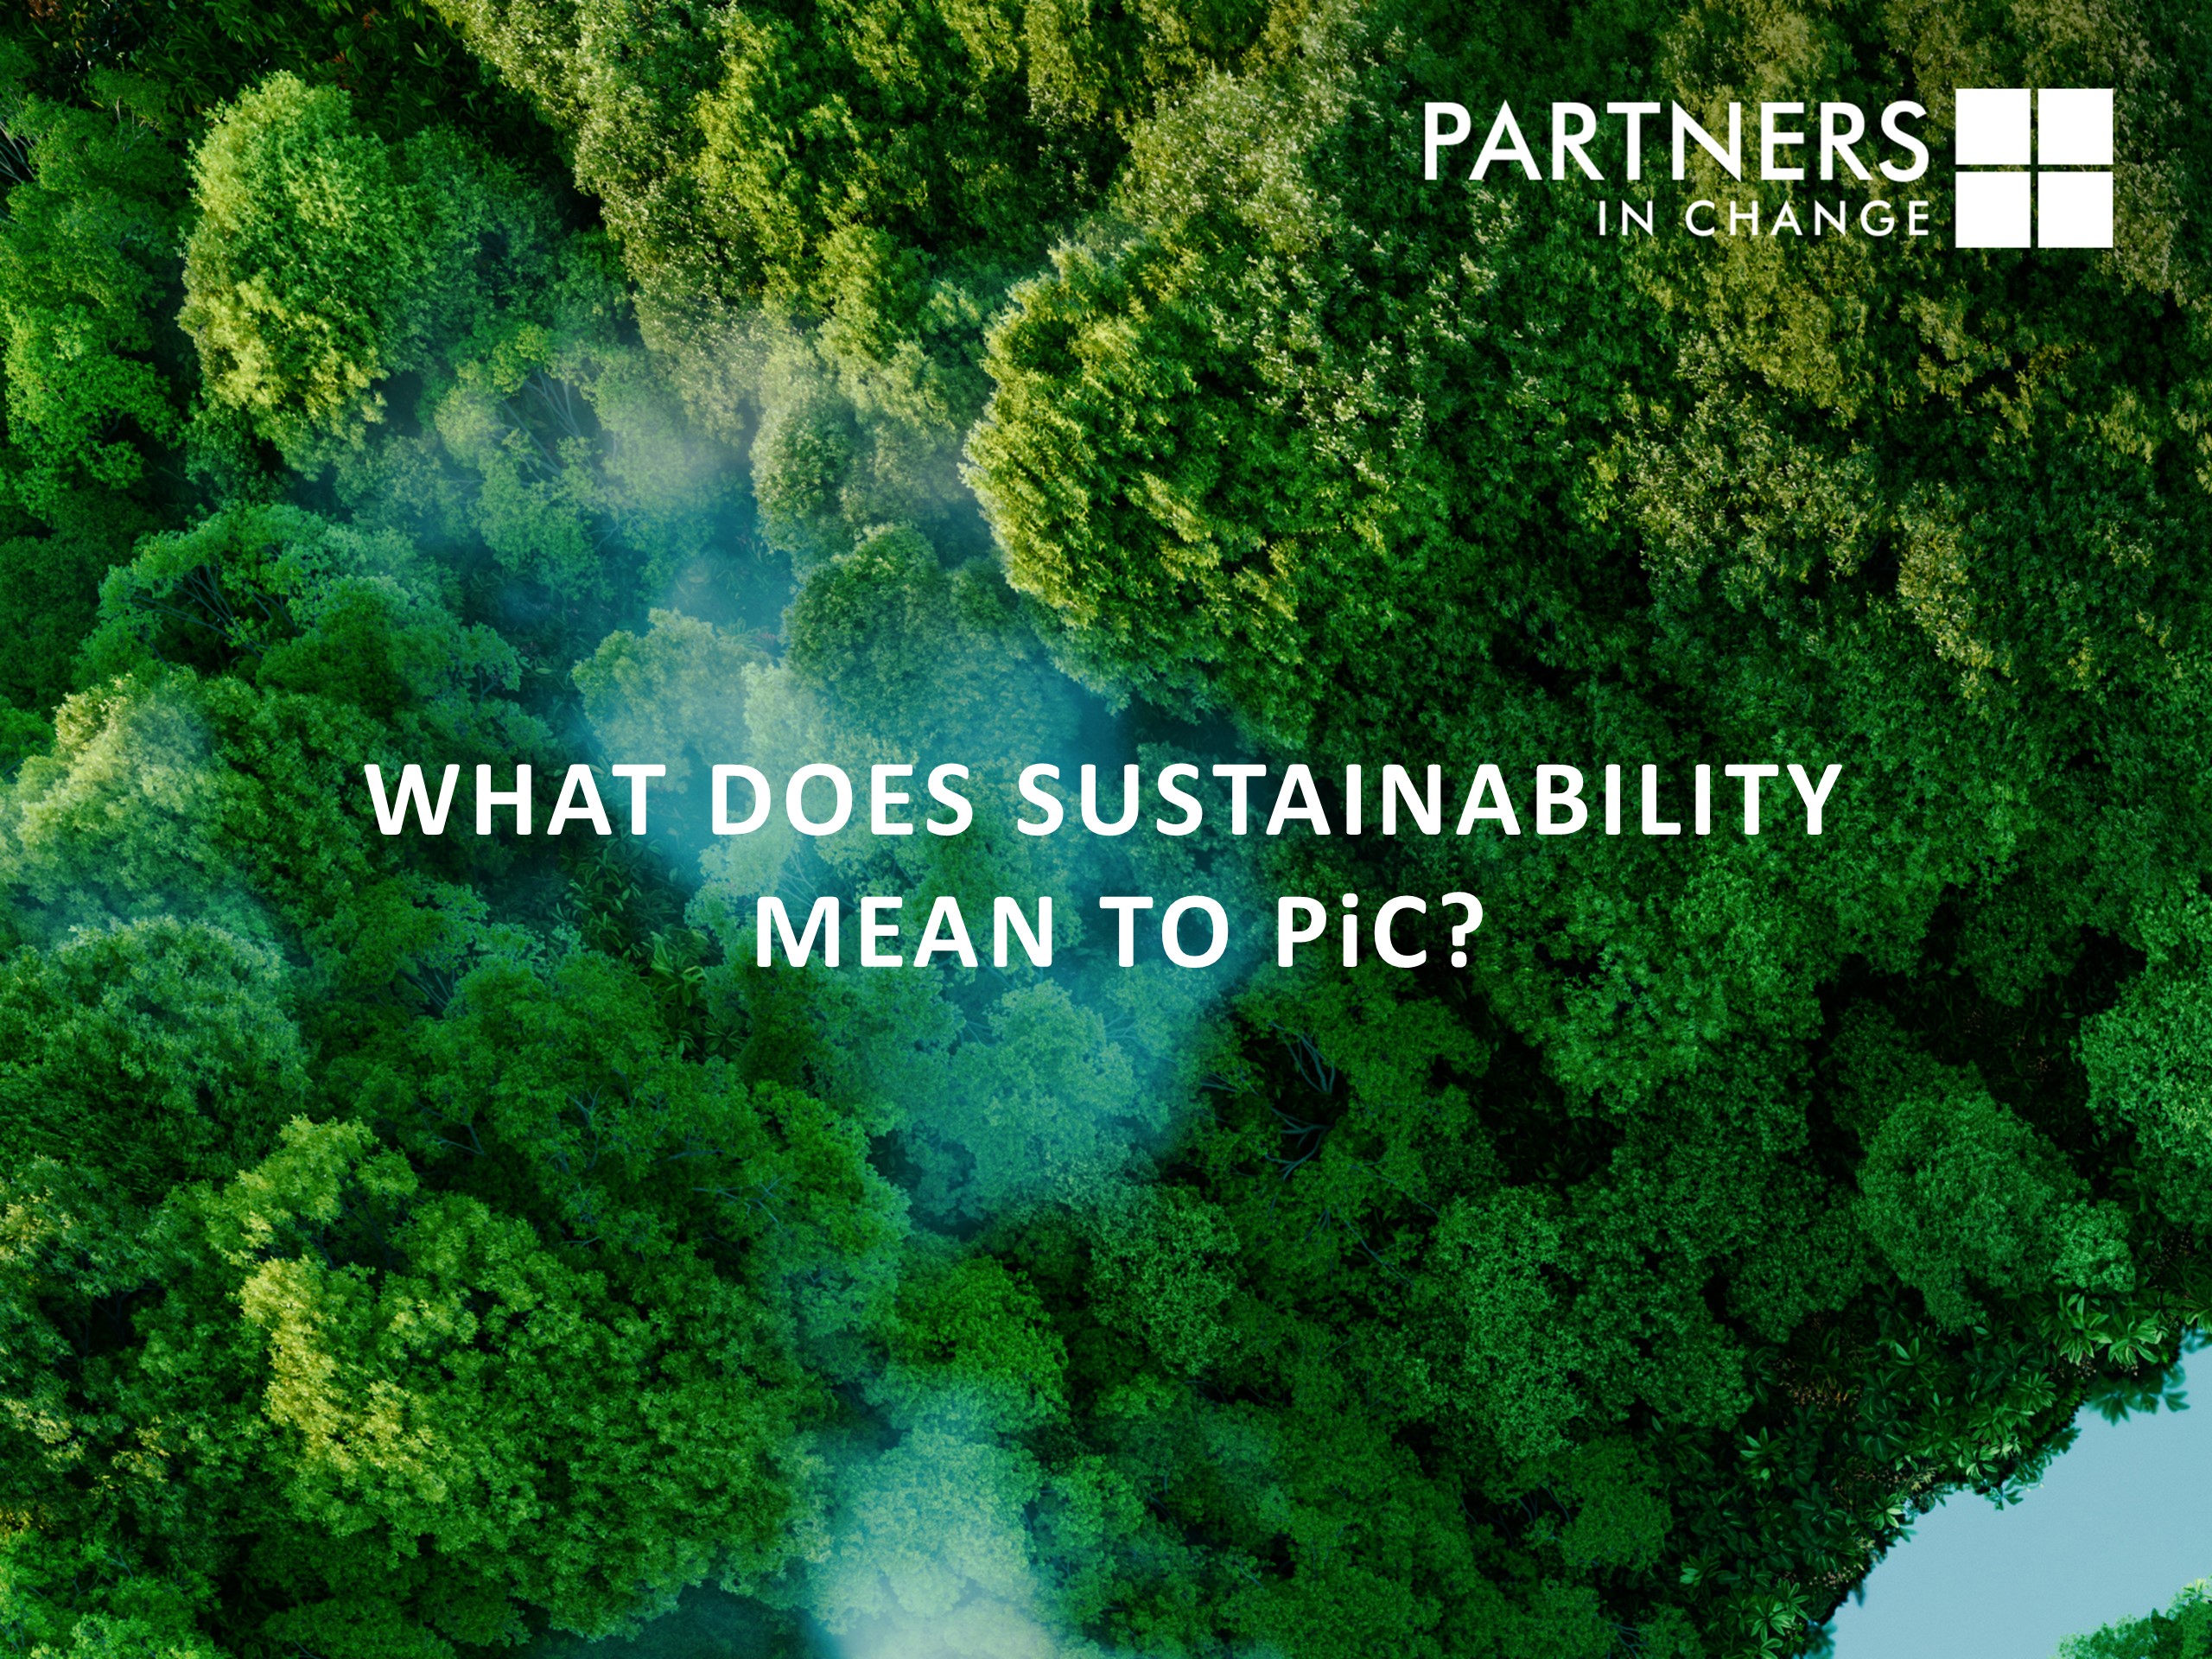 What does sustainability mean to PiC